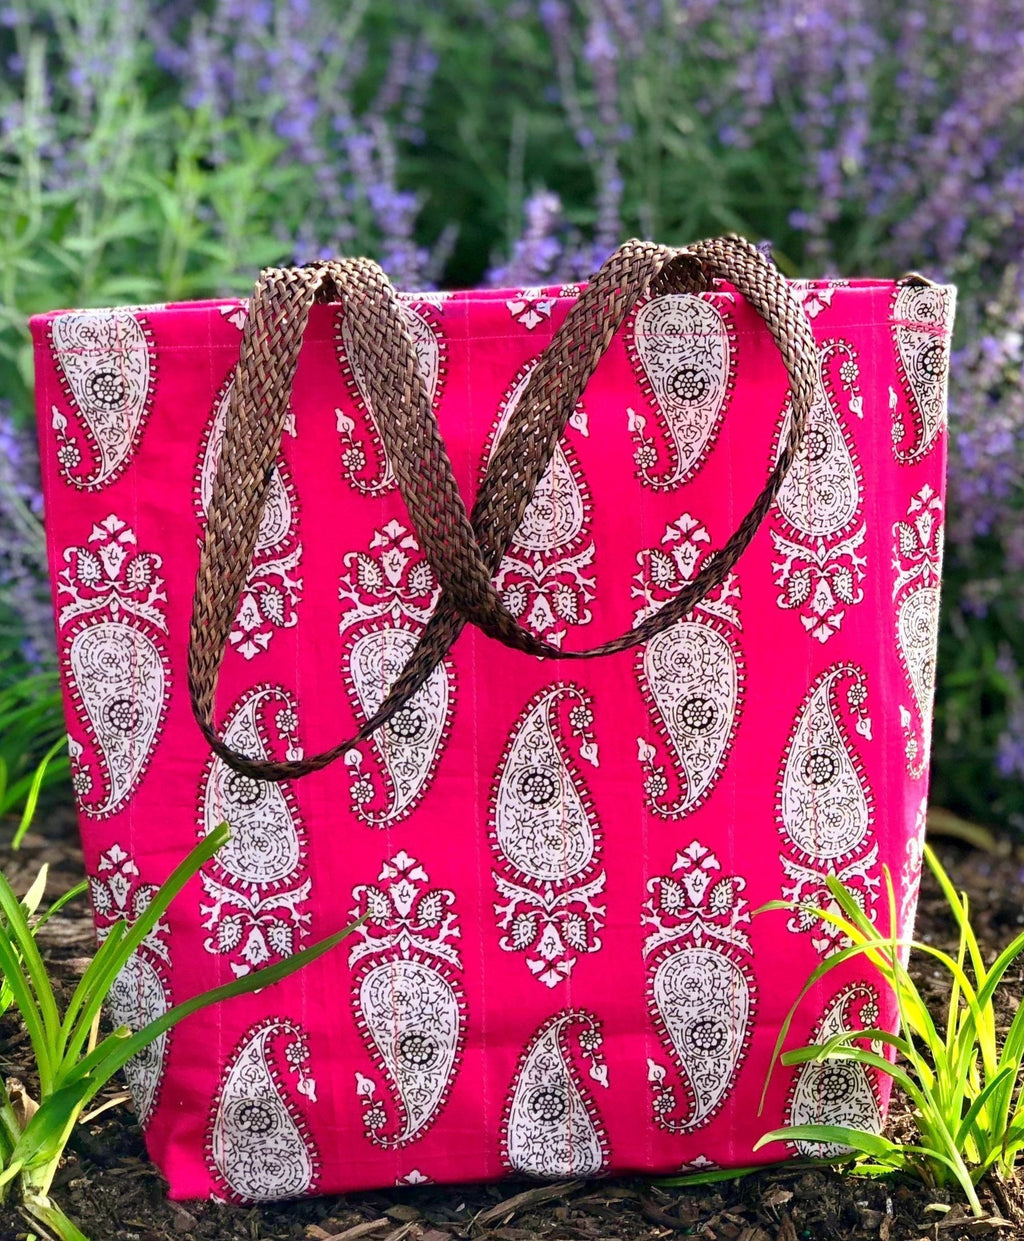 Handmade waterproof Colorful Fabric Indian unique tote handbag travelbag laptop bag traveltote pink paisely golden block print pinkbag printed summer colors pop of color ethnic